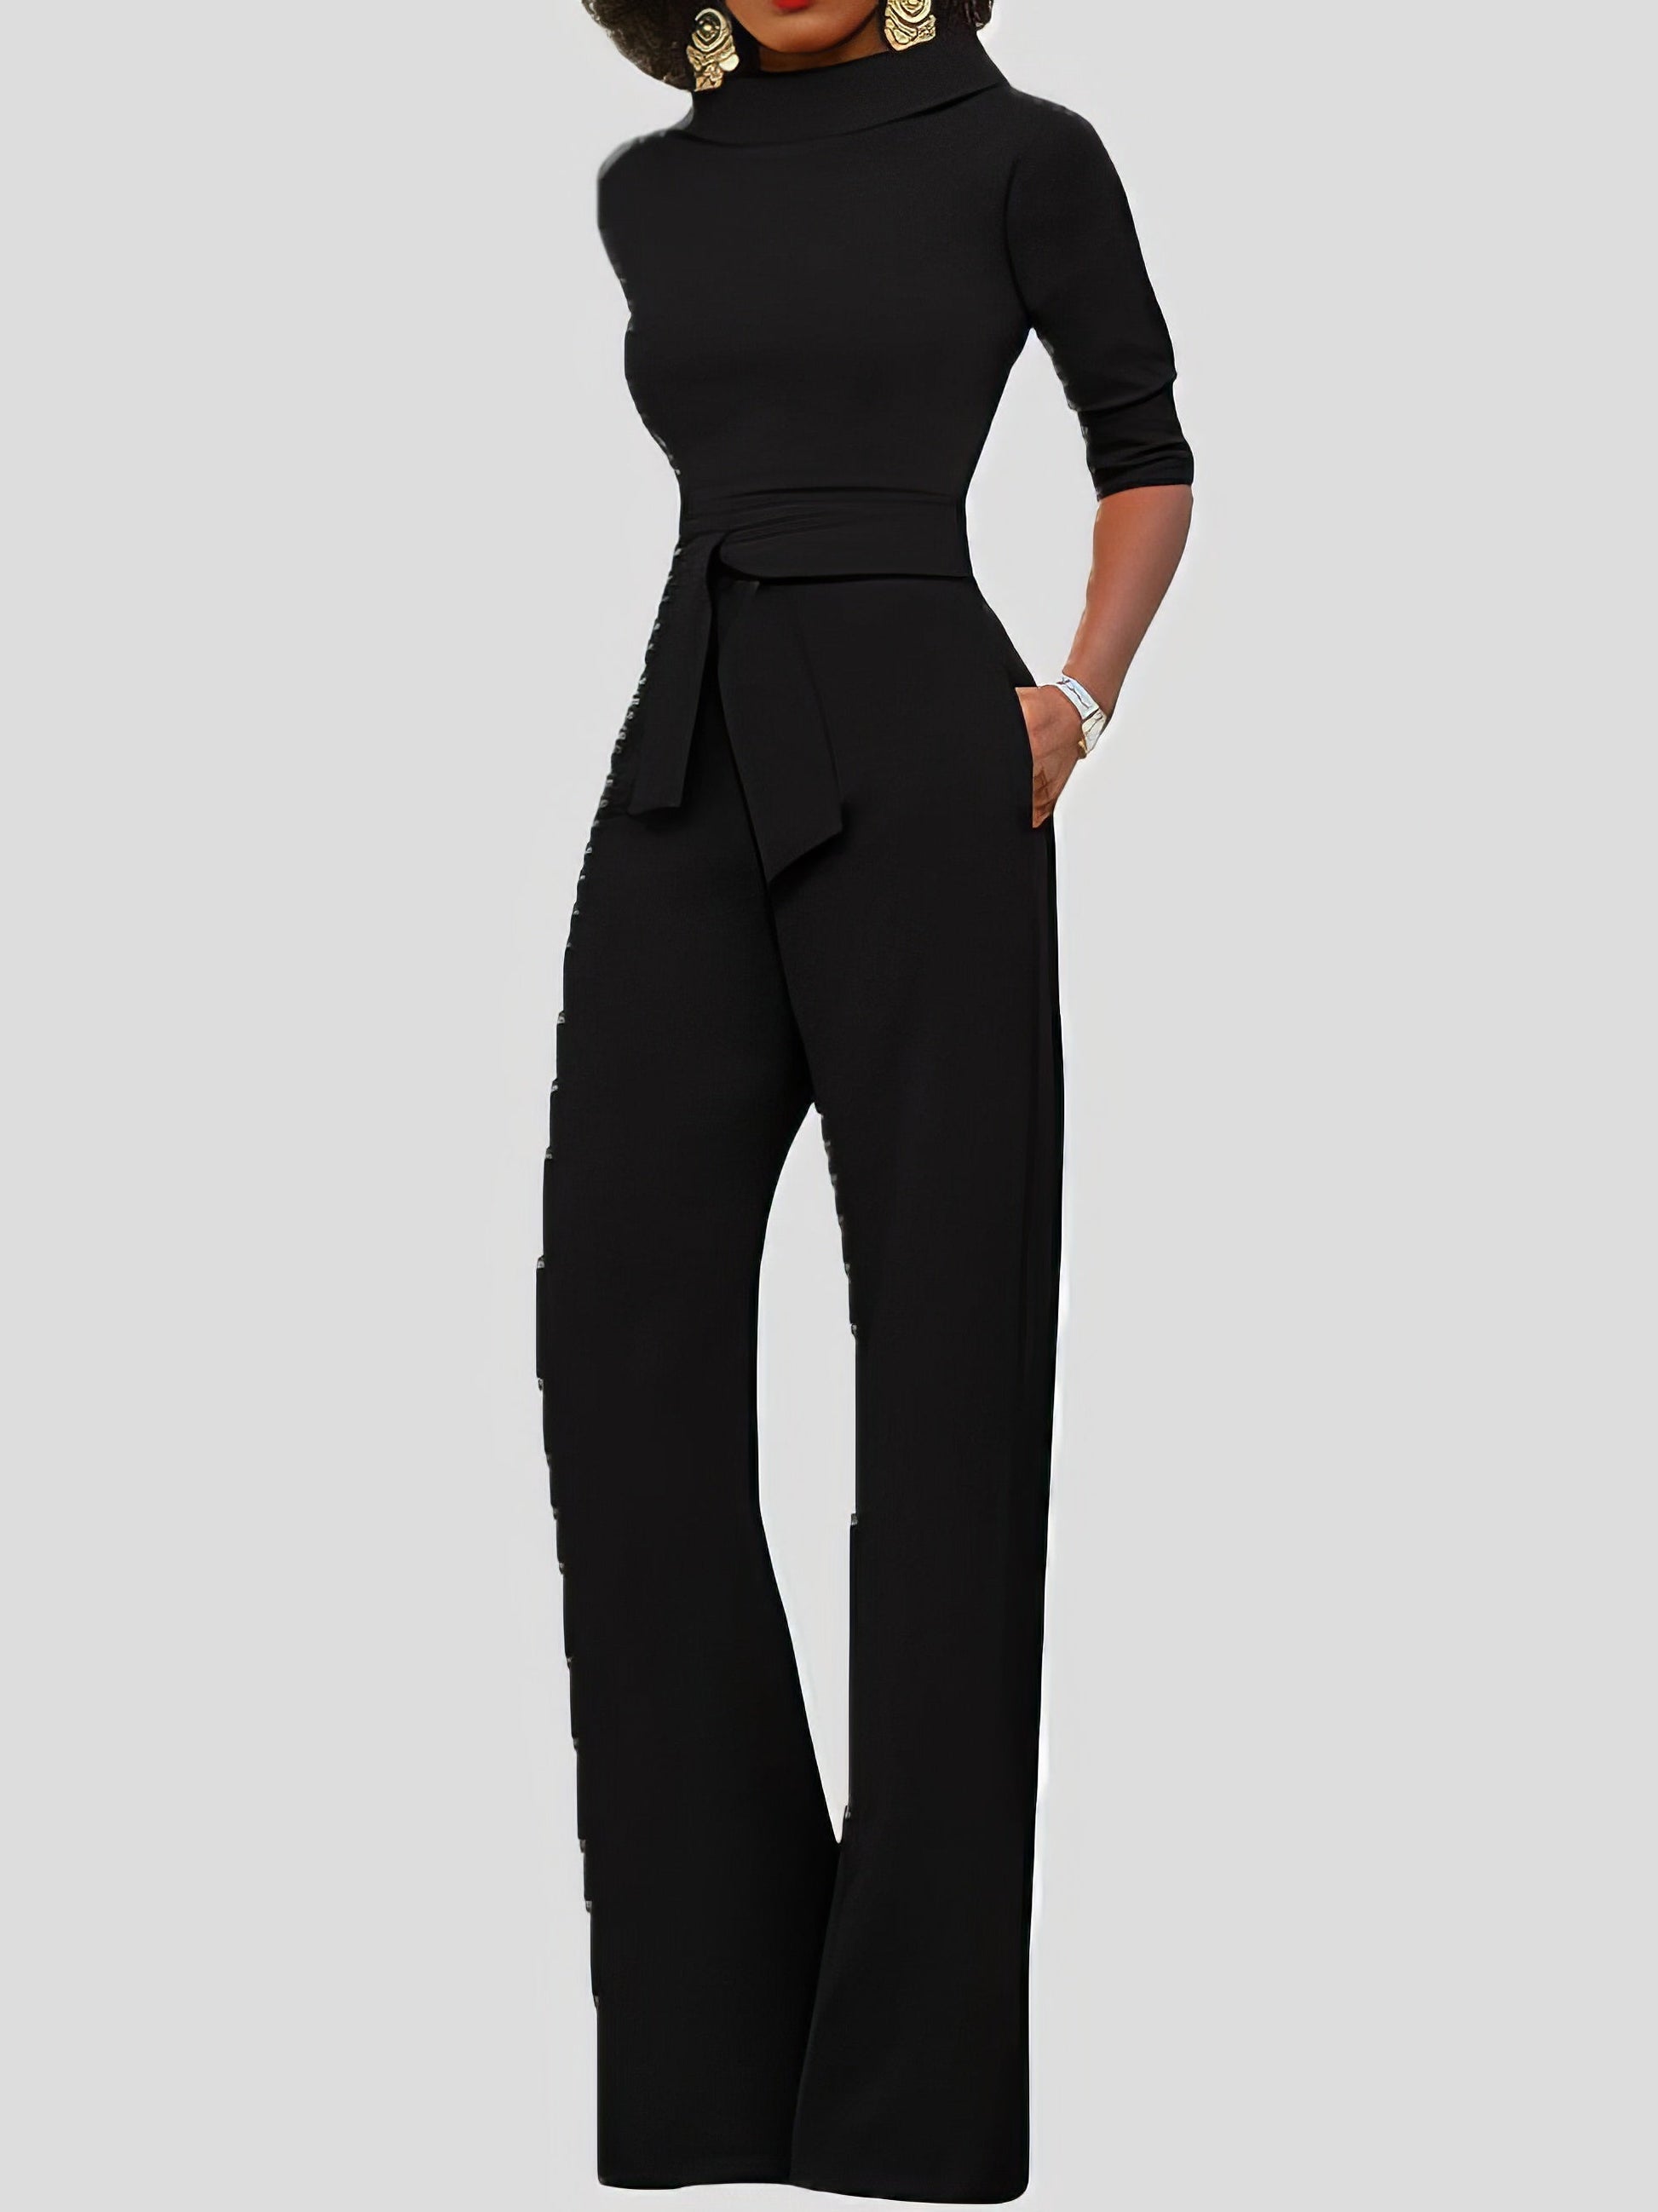 Jumpsuits - Solid Five-Point Sleeve Belted Wide-Leg Jumpsuit - MsDressly